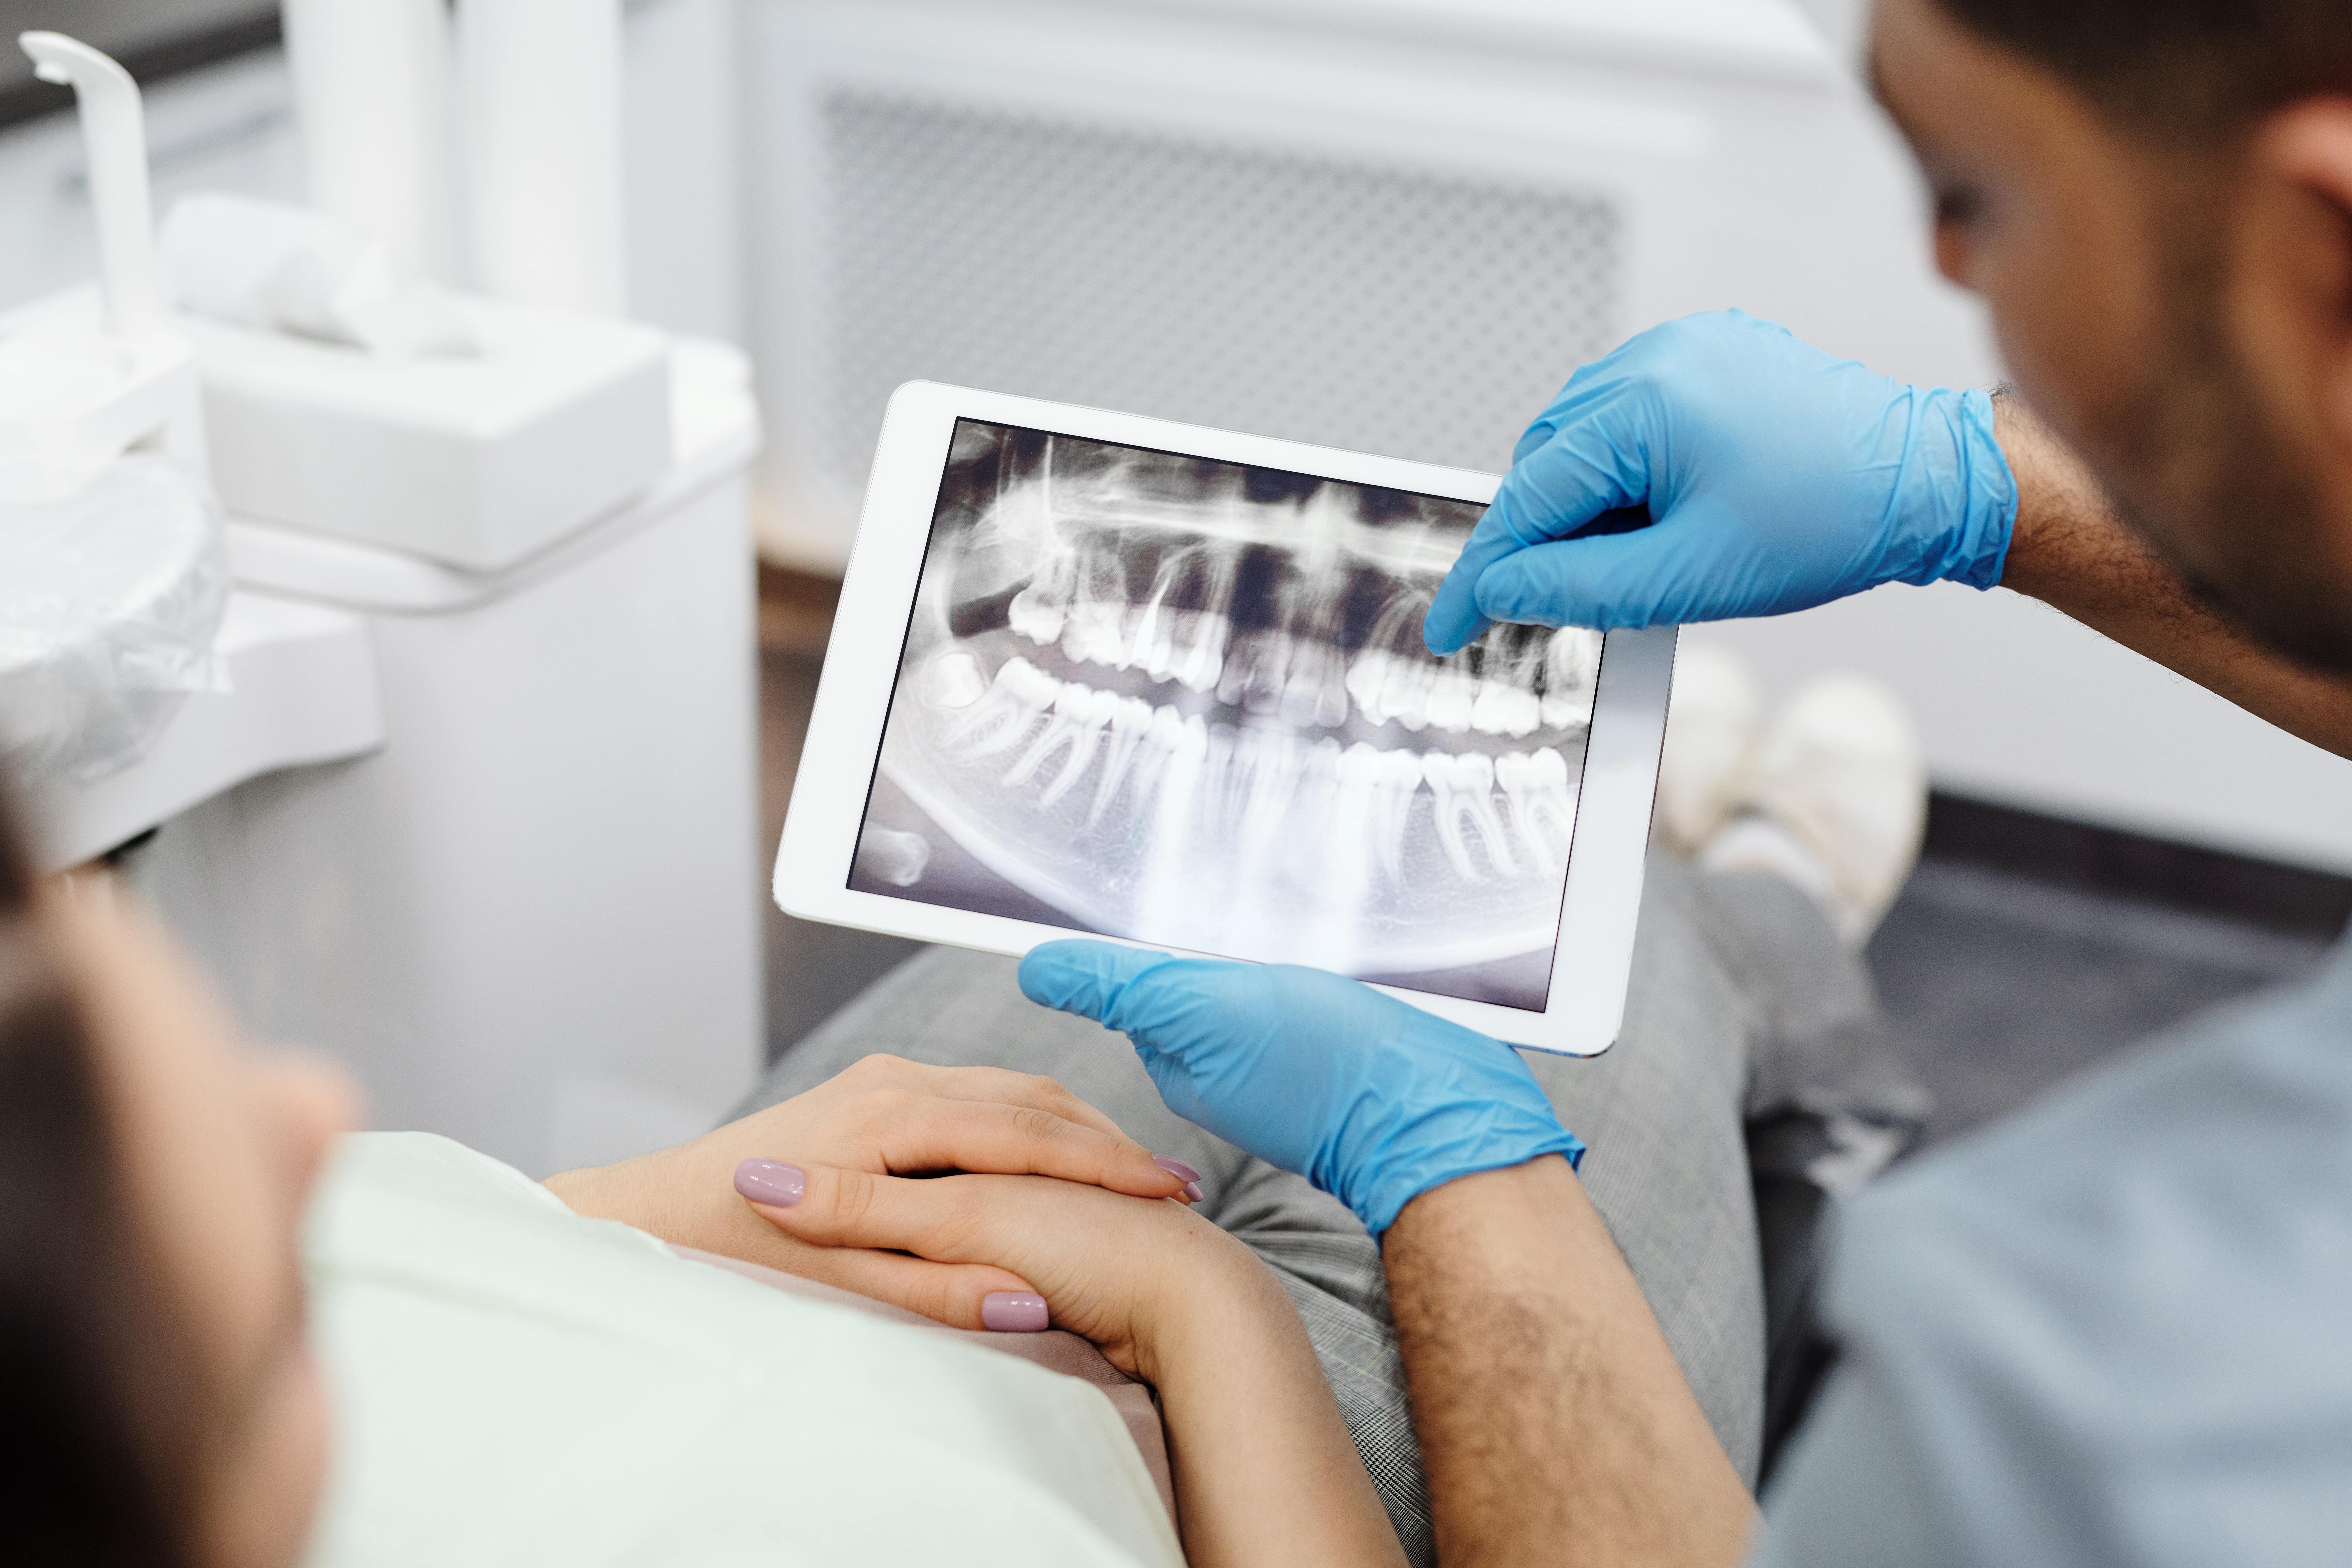 dentist shows patient's dental x-rays and problems on tablet